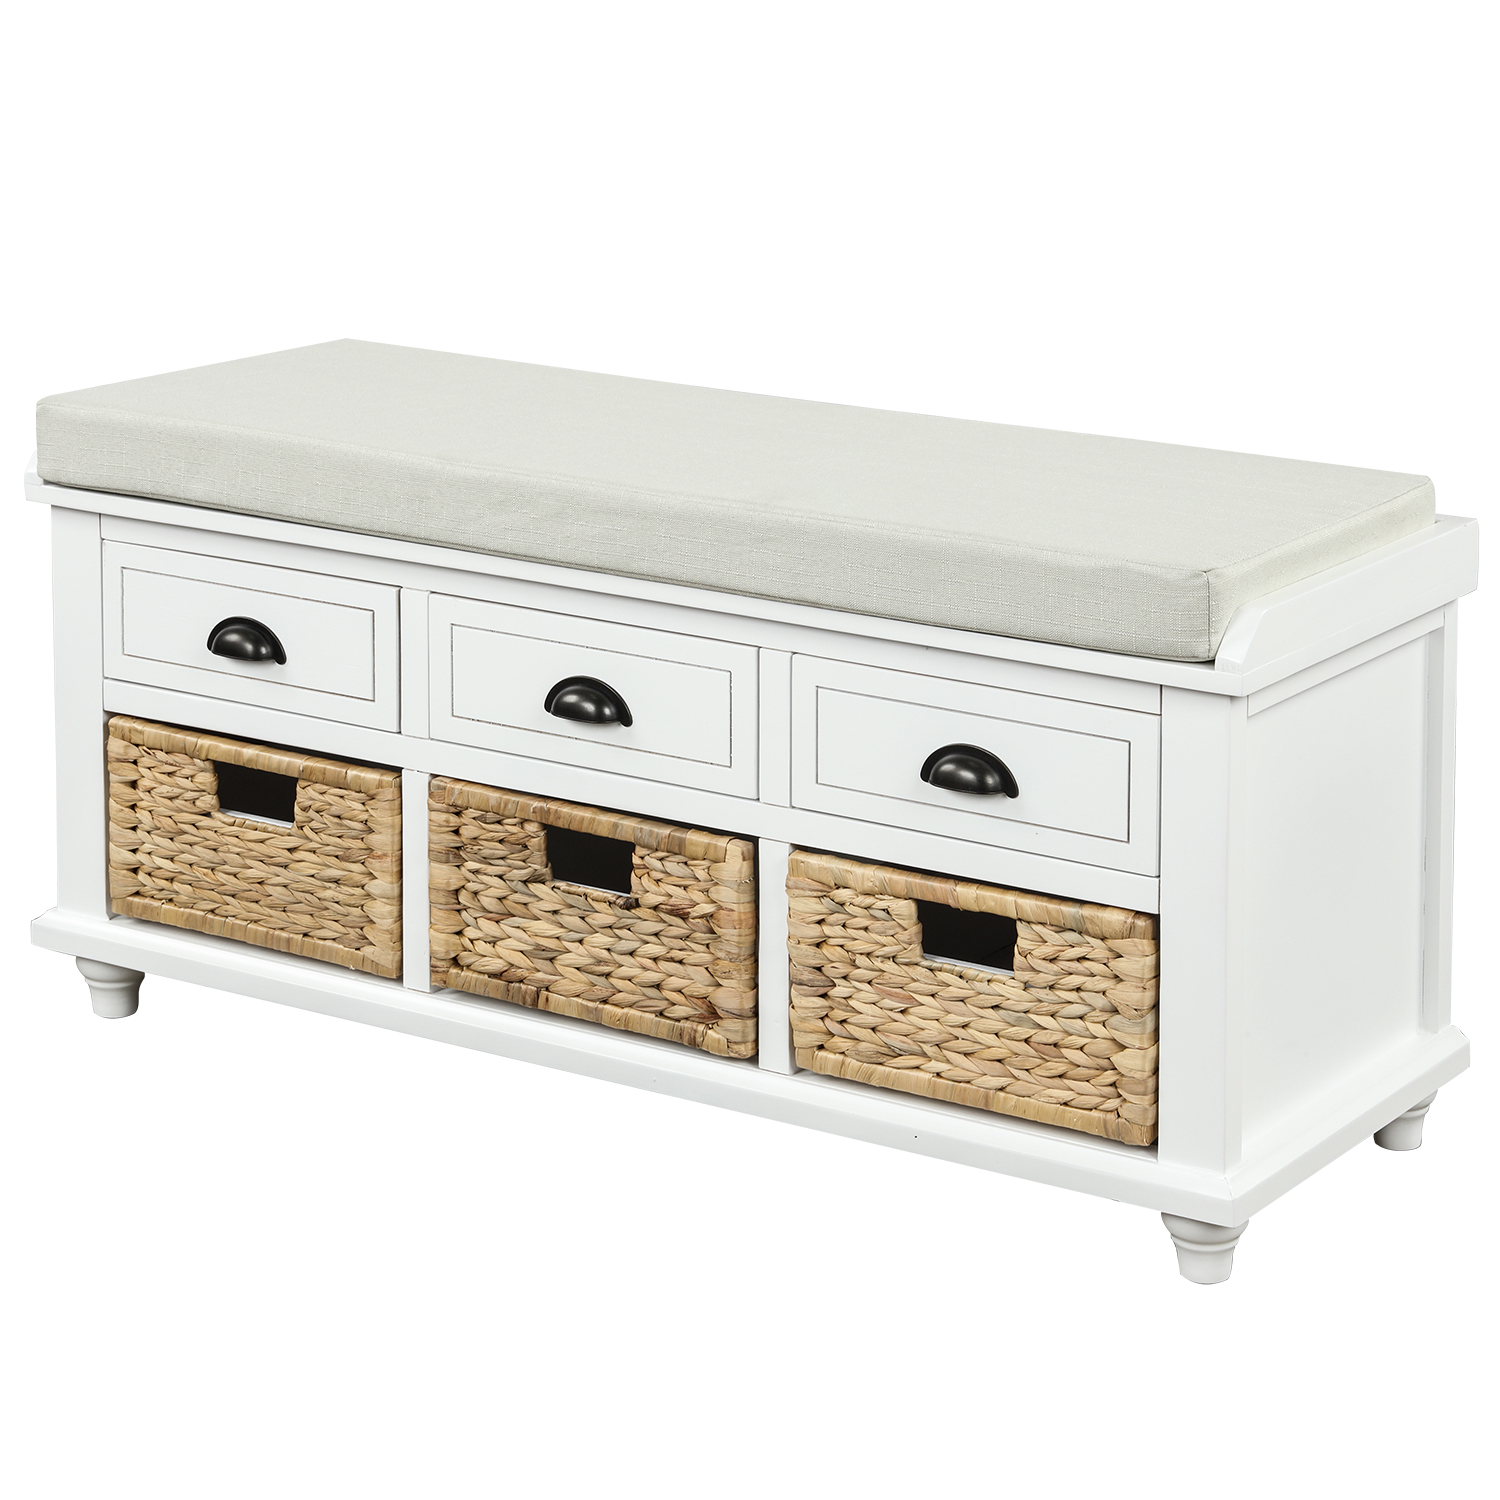 Rustic Storage Bench with 3 Drawers and 3 Rattan Baskets - WF195161AAK